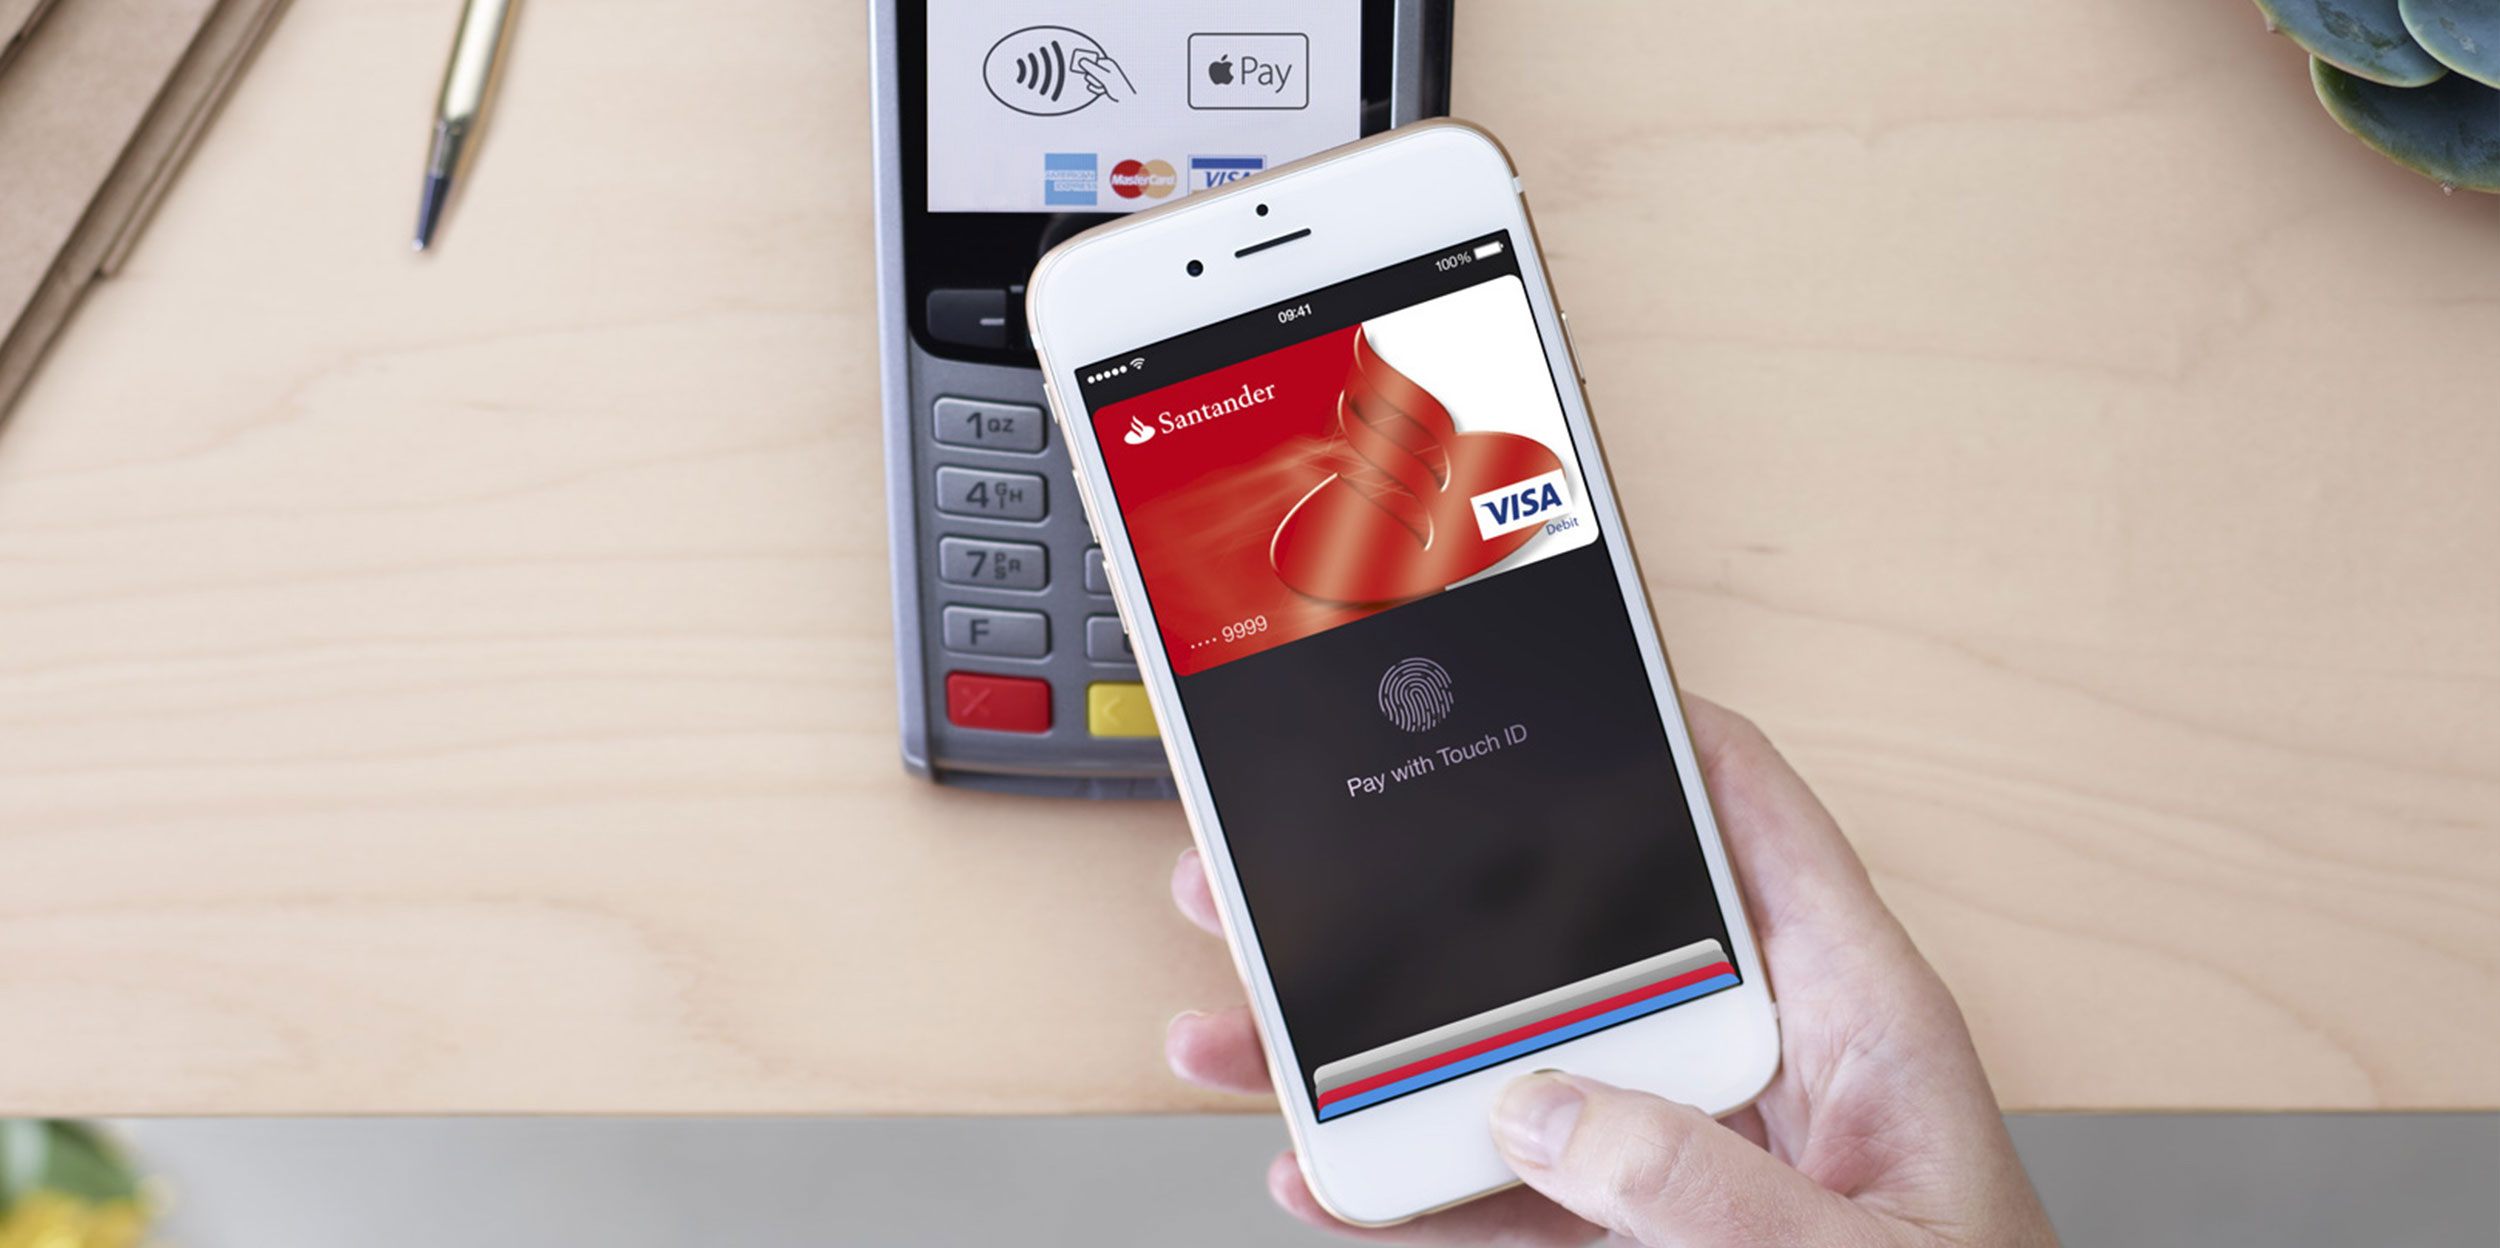 An iPhone using Apple Pay on a credit card reader.